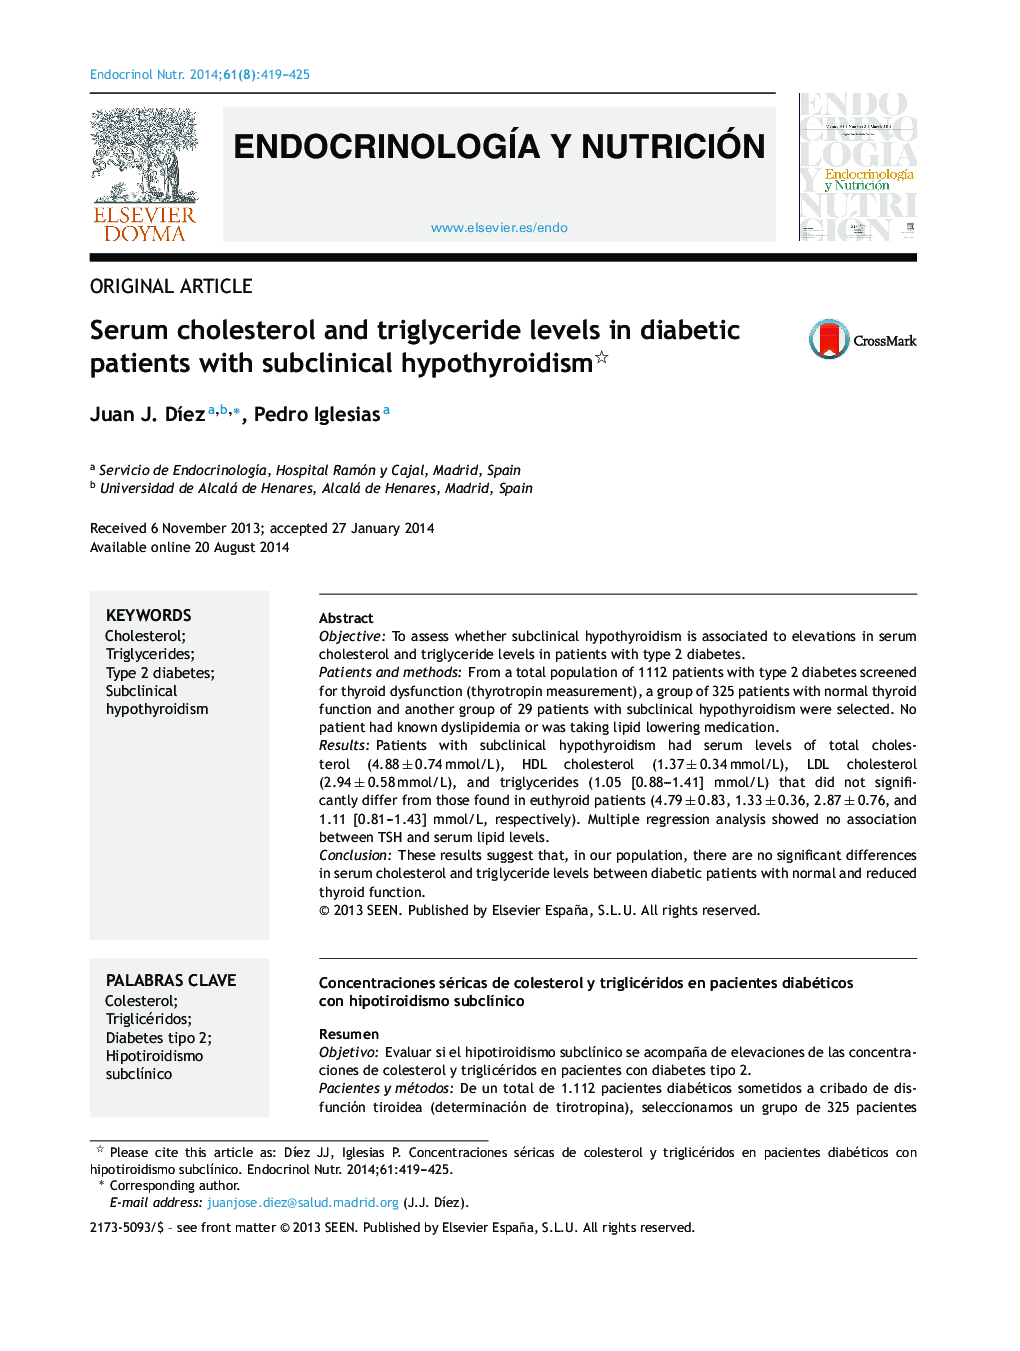 Serum cholesterol and triglyceride levels in diabetic patients with subclinical hypothyroidism 